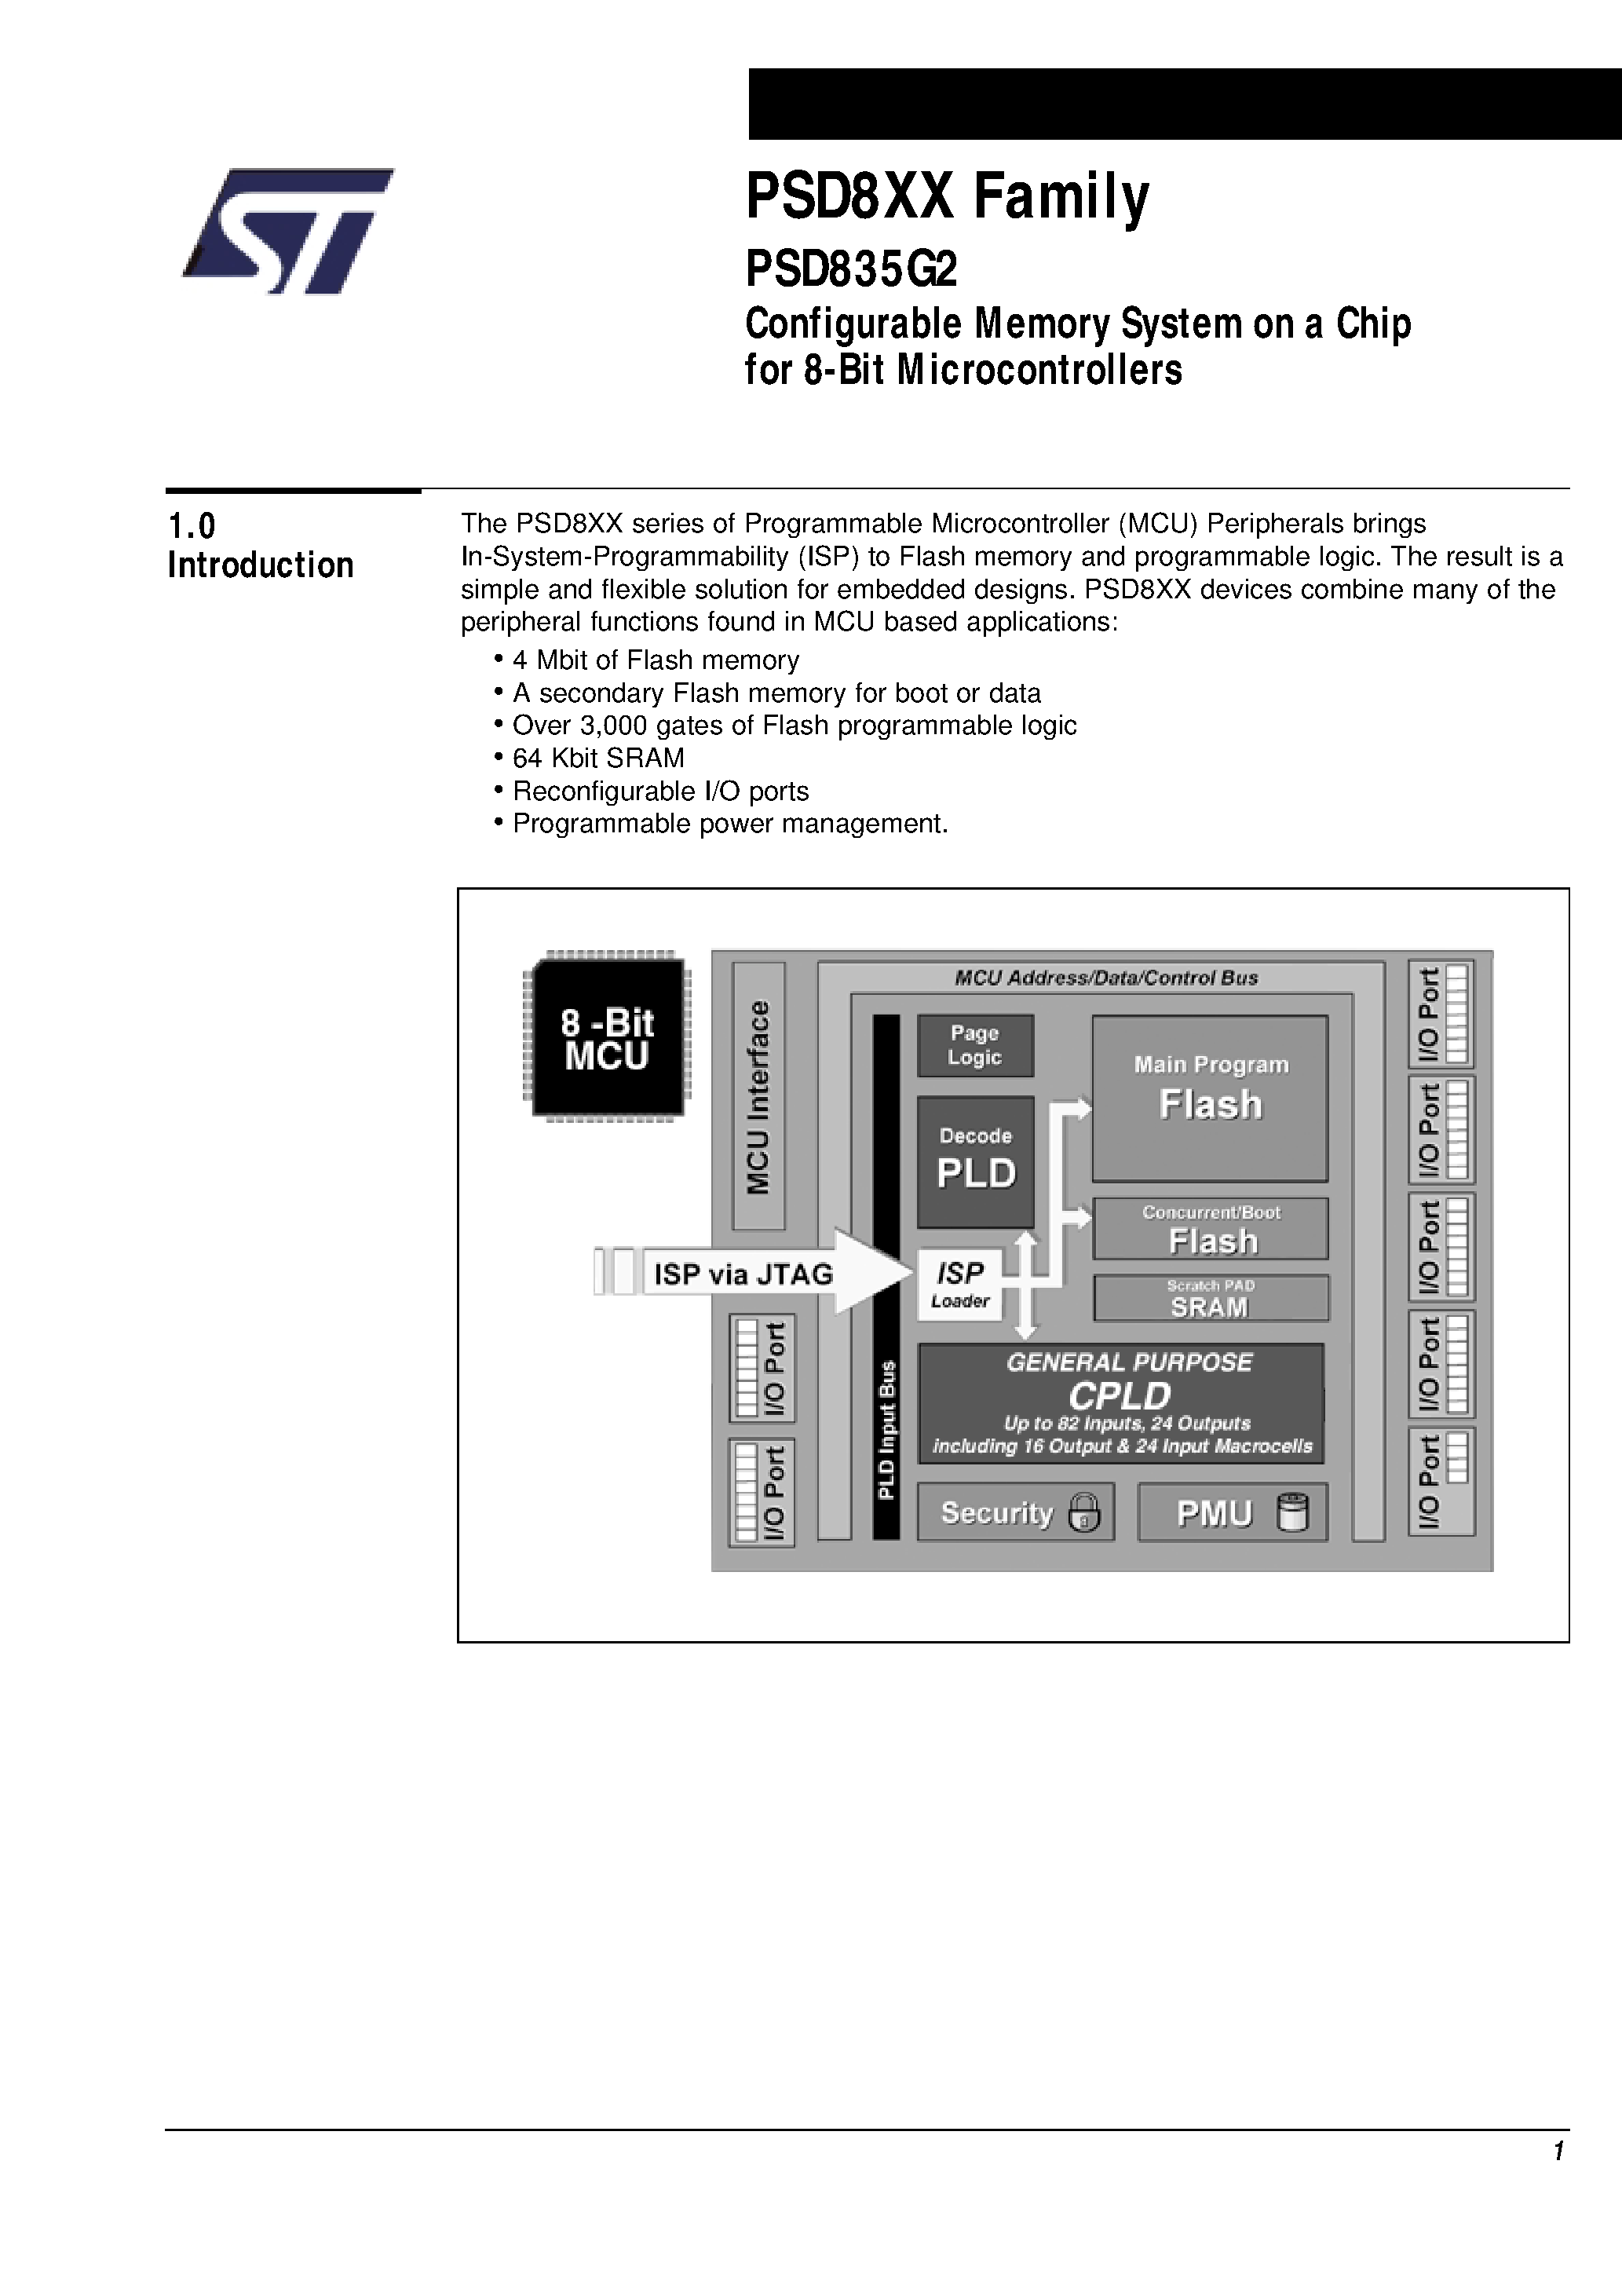 Datasheet PSD835F1-A-90U - Configurable Memory System on a Chip for 8-Bit Microcontrollers page 2